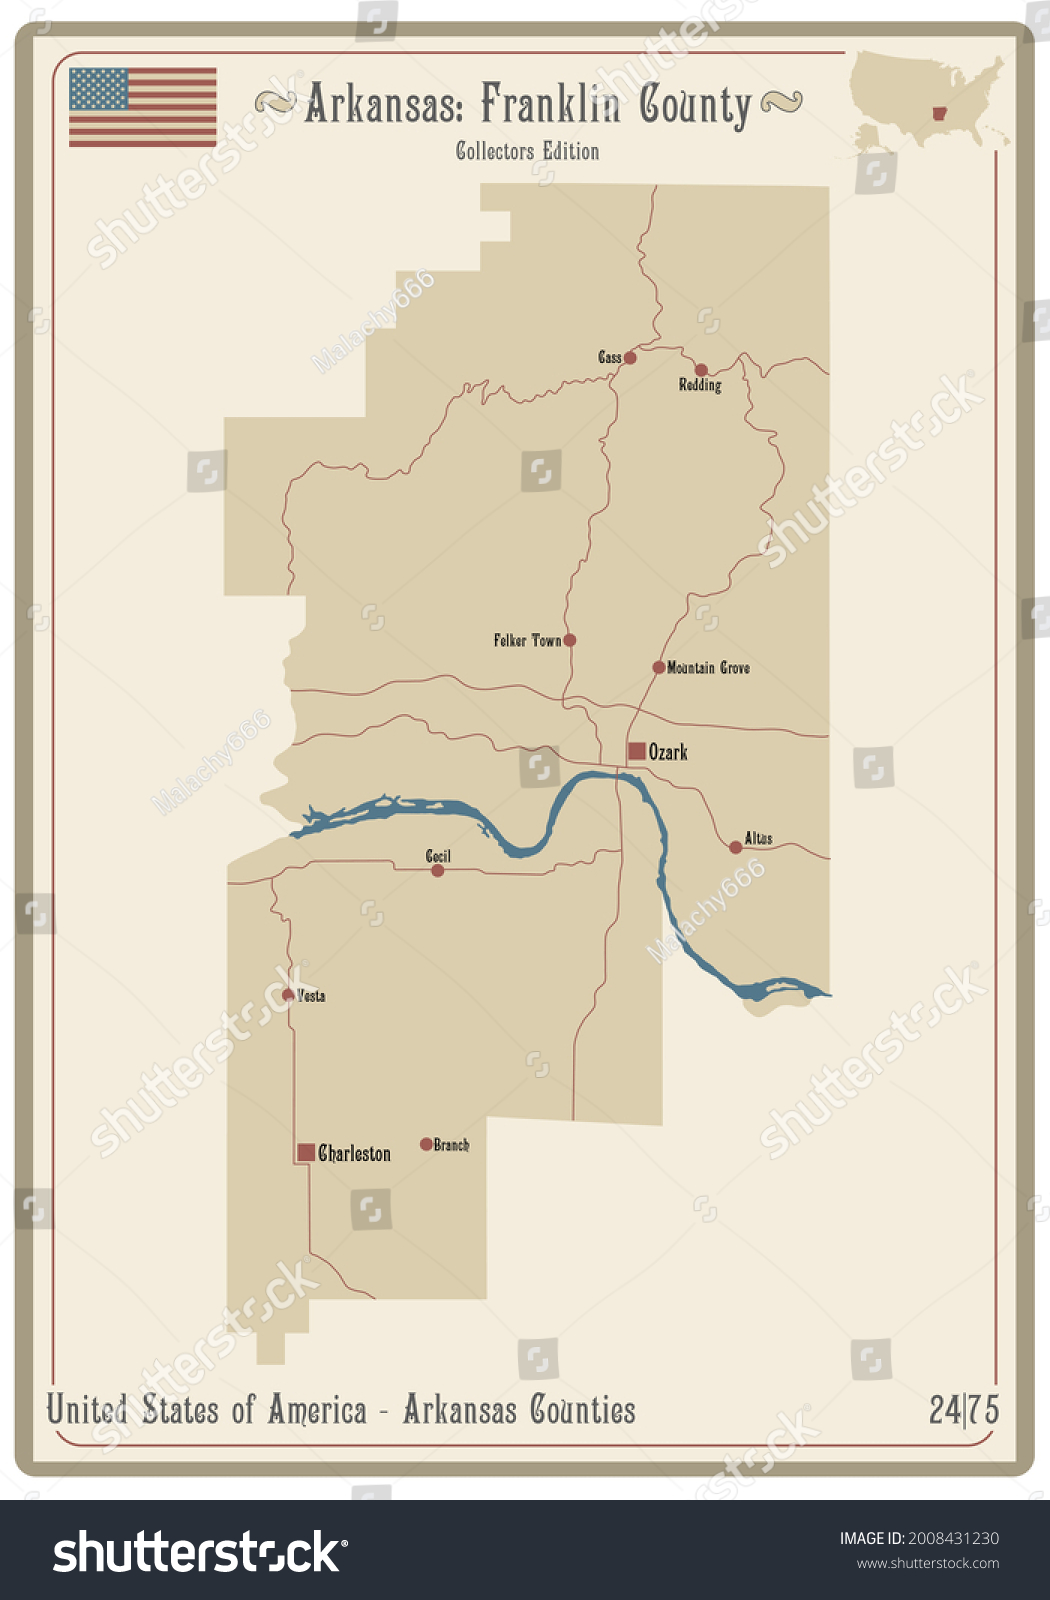 SVG of Map on an old playing card of Franklin county in Arkansas, USA. svg